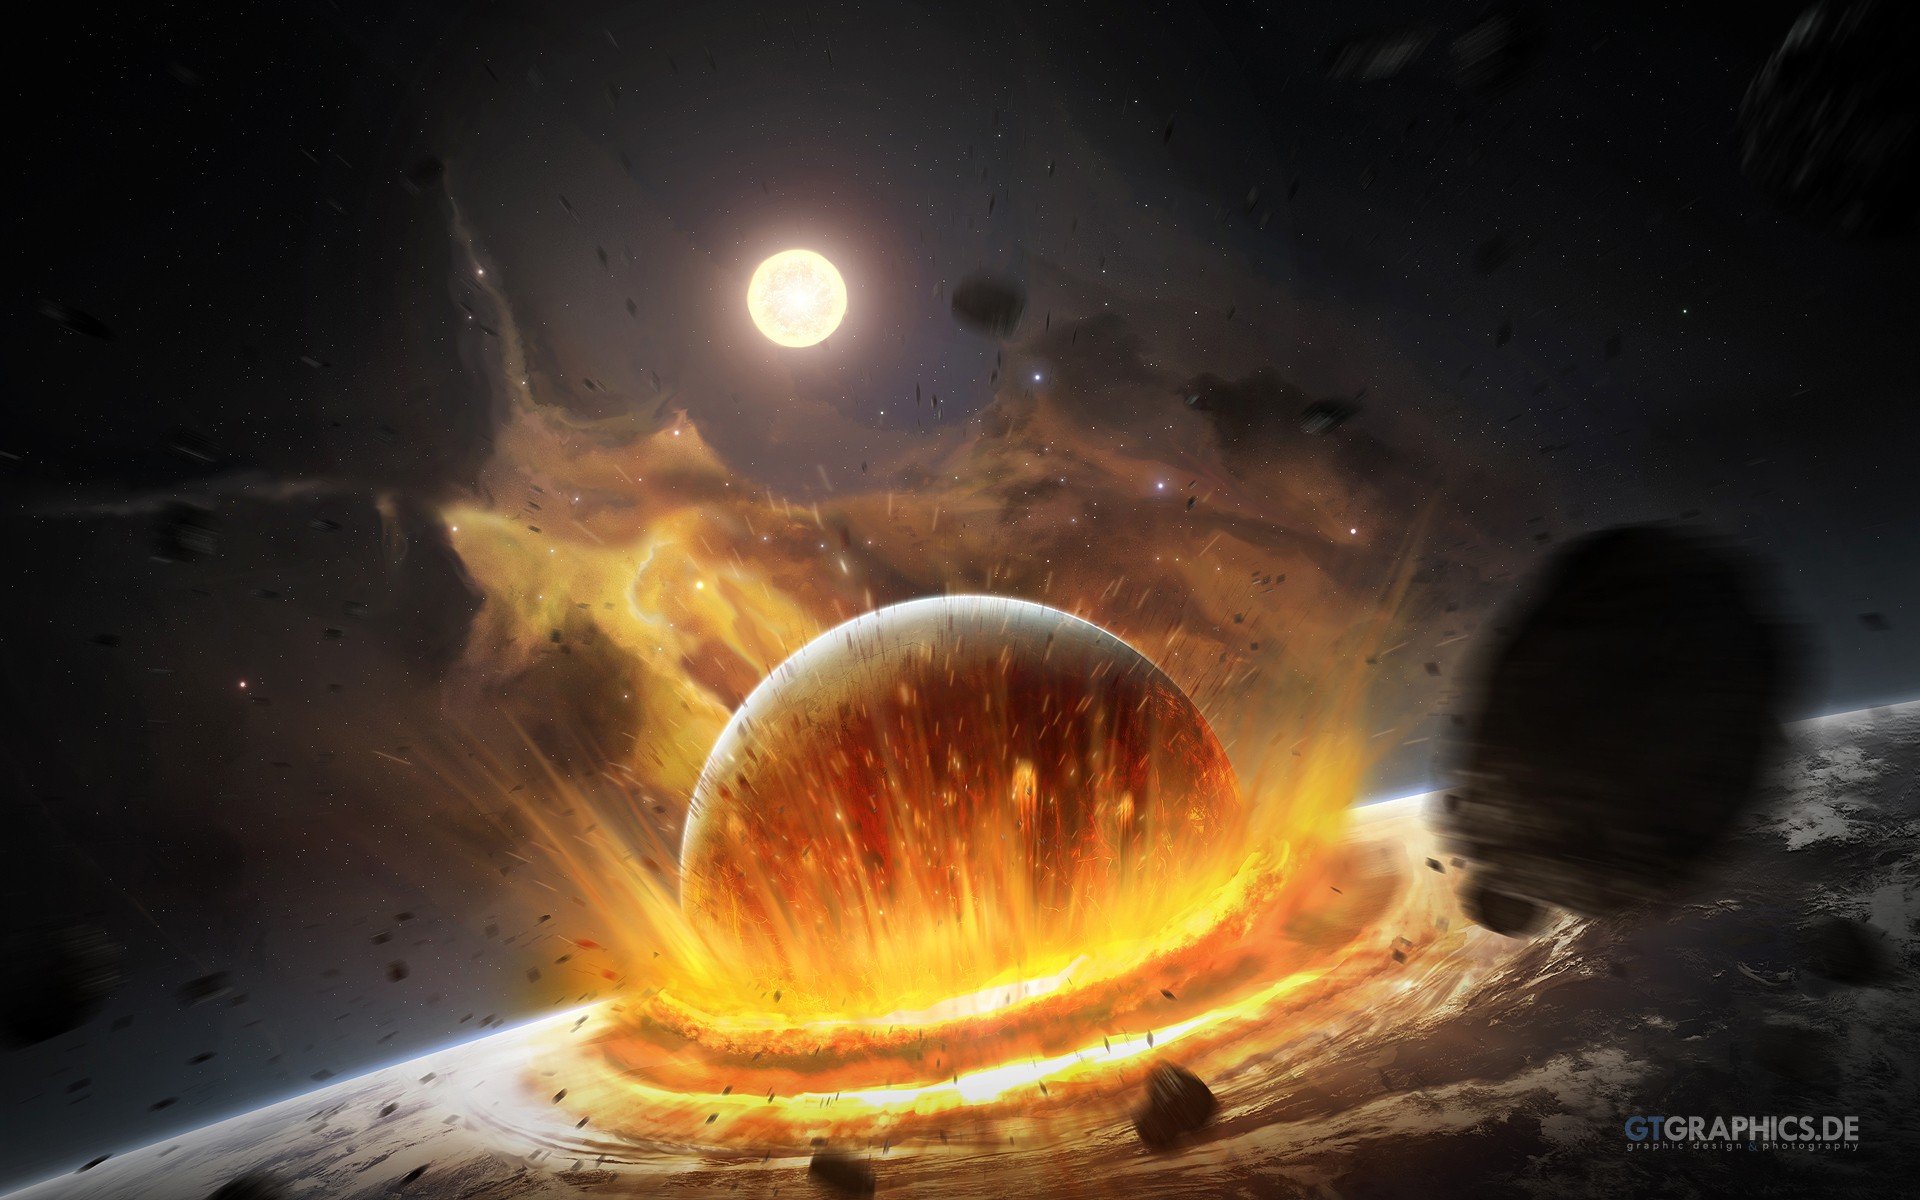 outer, Space, Explosions, Fire, Impact, Meteors Wallpaper